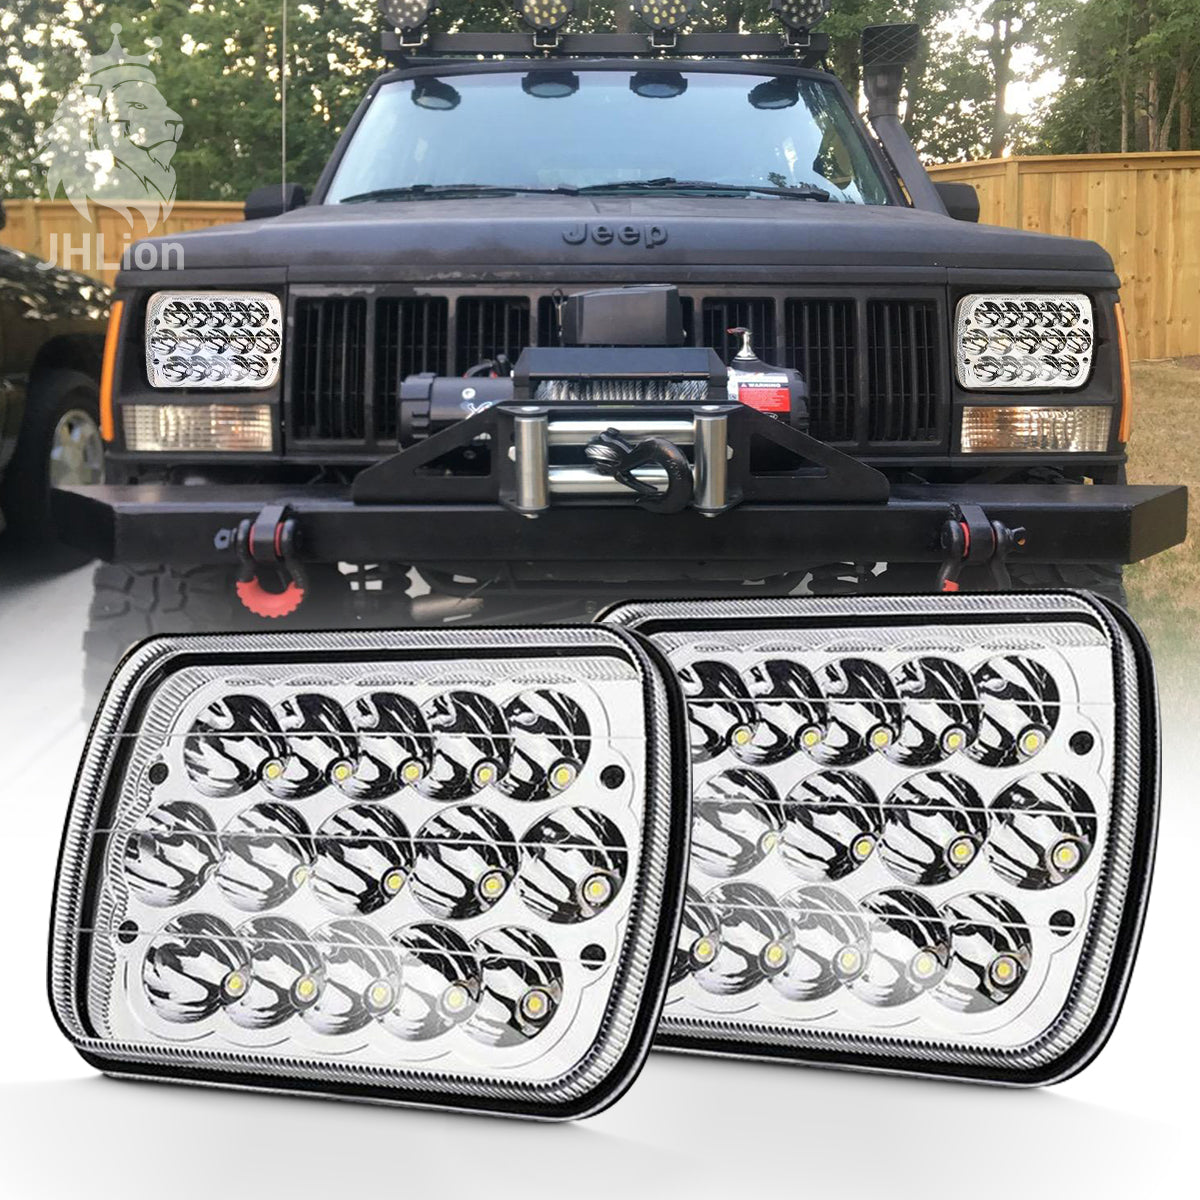 7X6 Led Sealed Beam Headlights  Replace H6054 Headlamps For Jeep Wrangler JK 